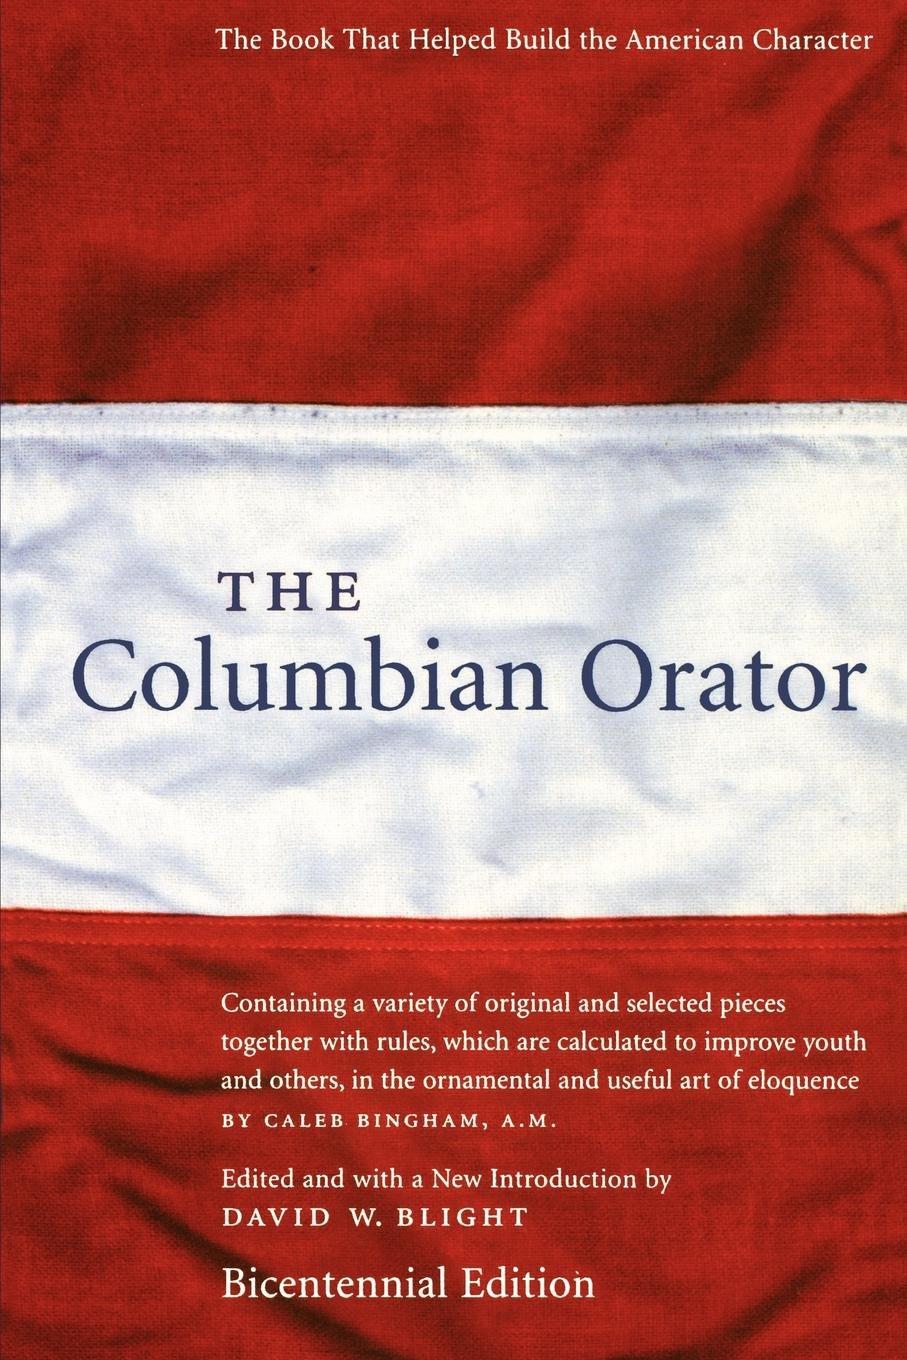 The cover of David W. Blight's 1998 bicentennial edition of "The Columbian Orator."